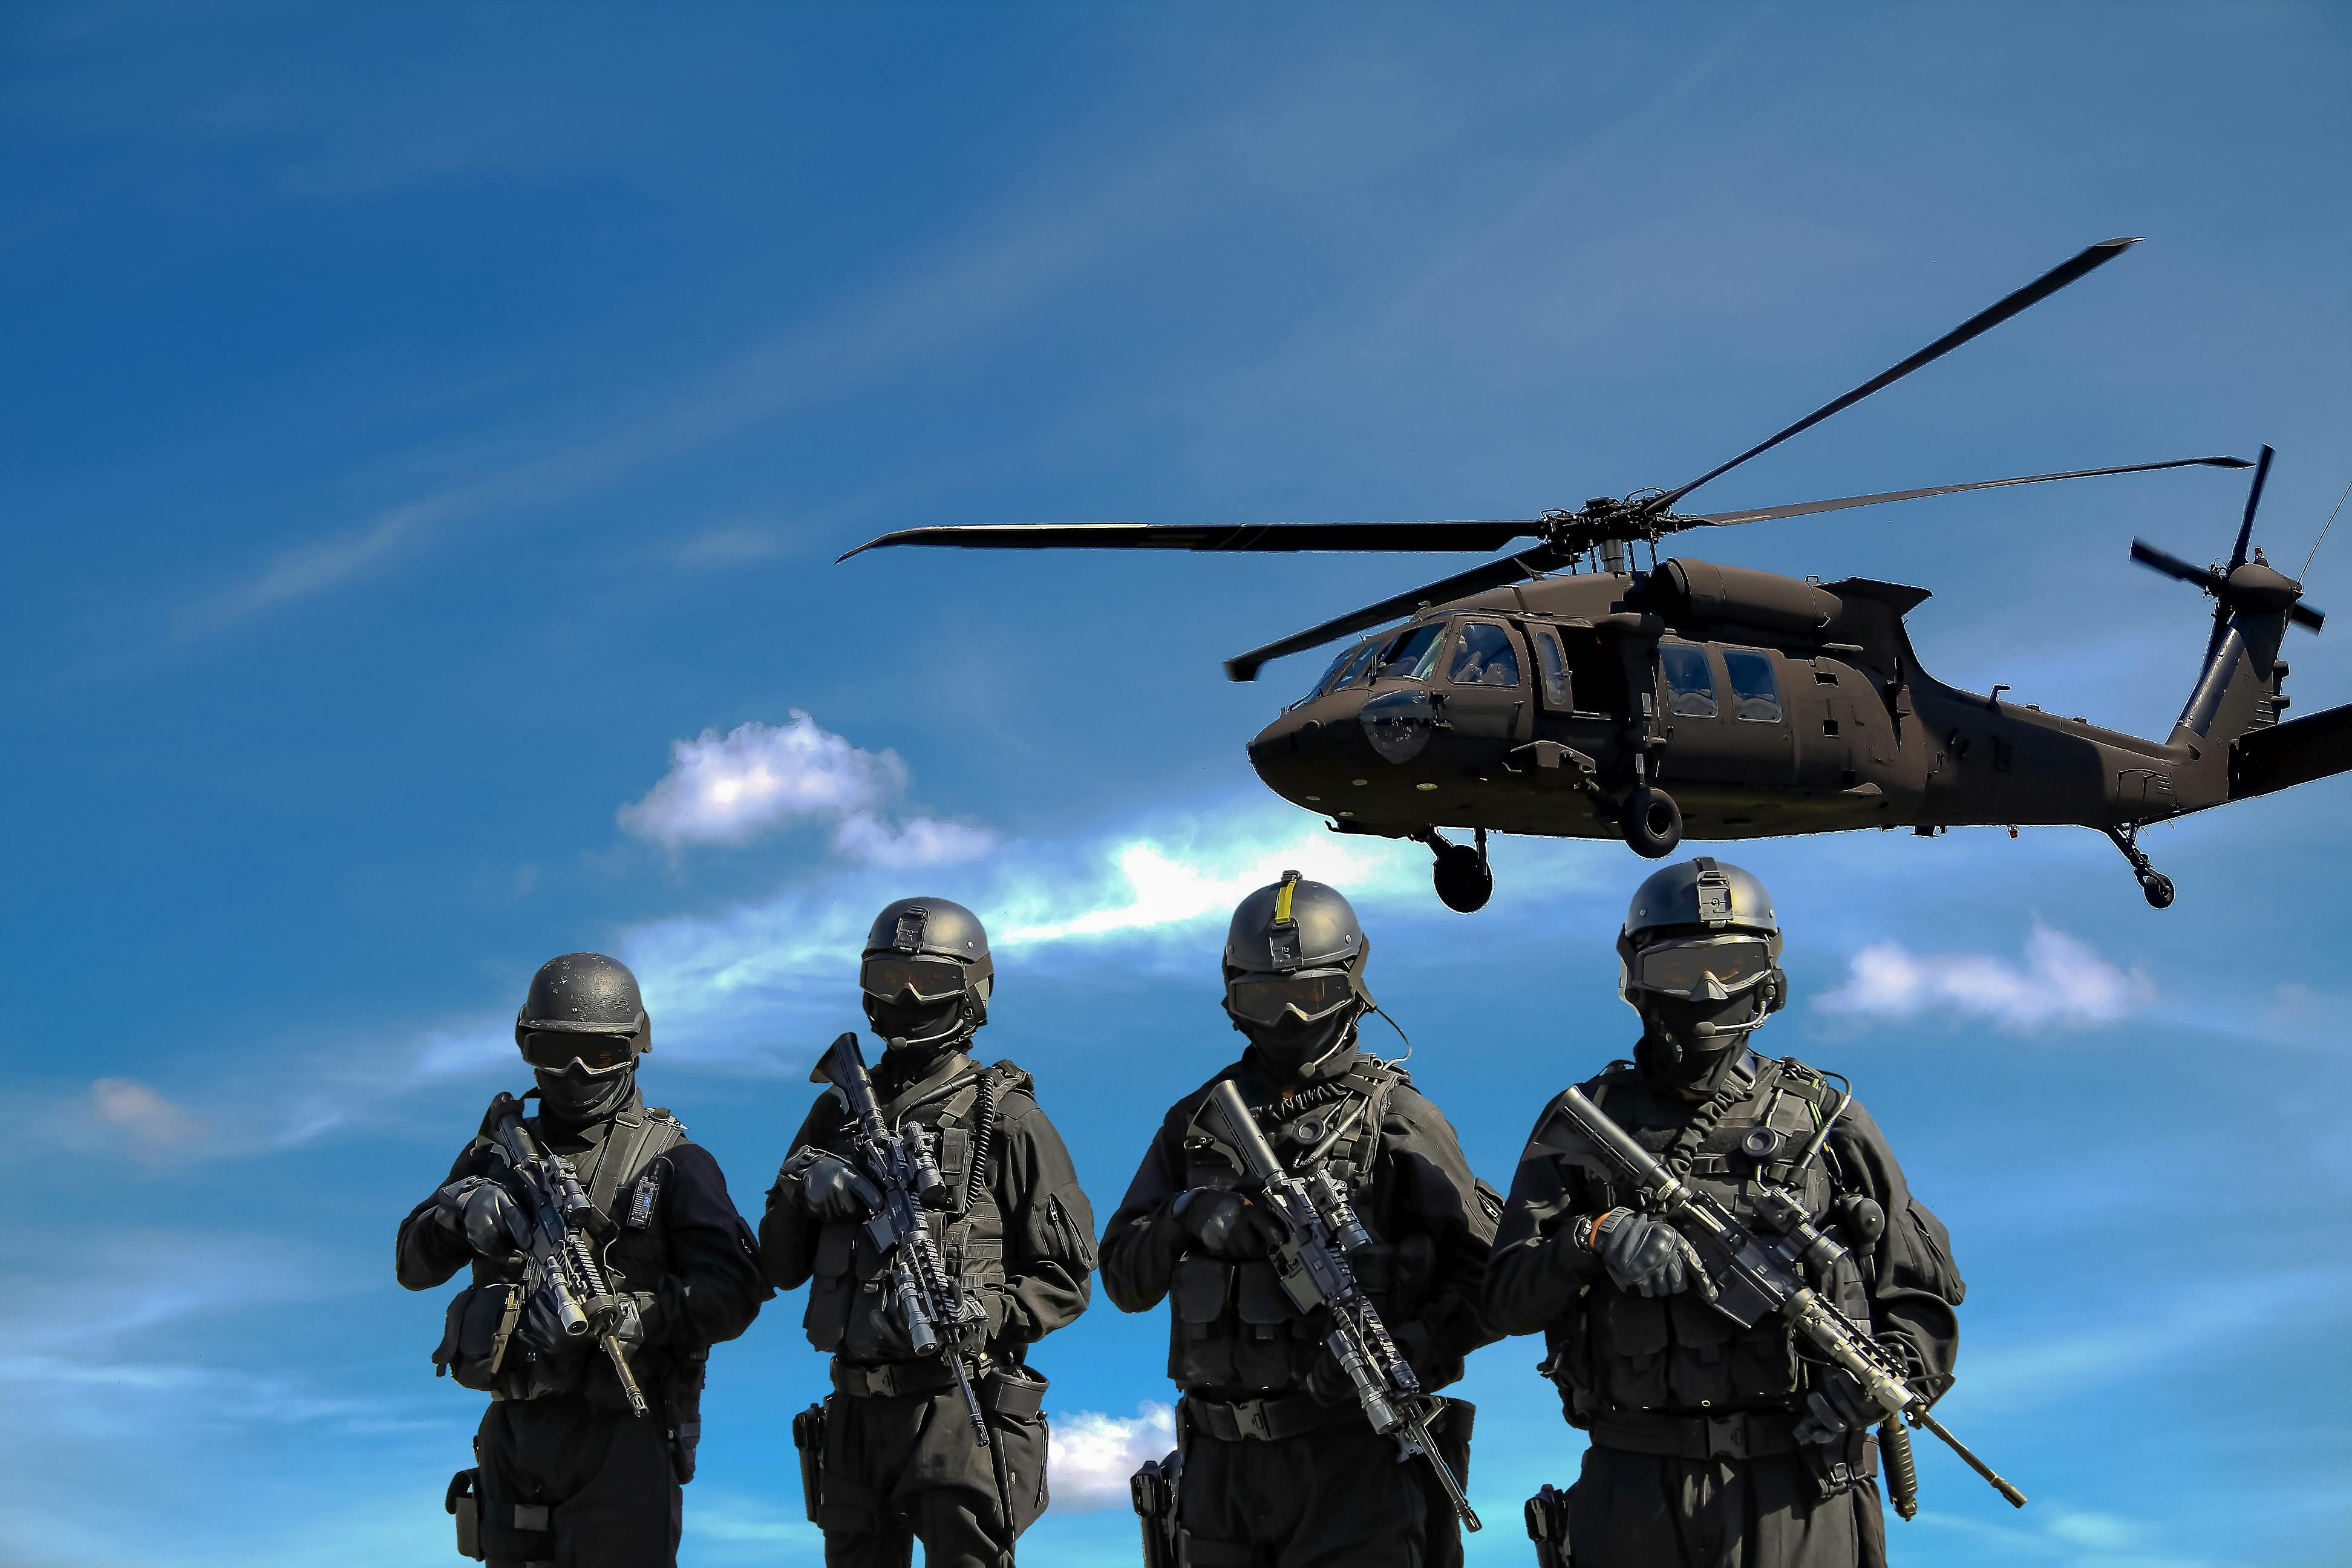 Four soldiers carrying rifles near helicopter | Photo: Pexels